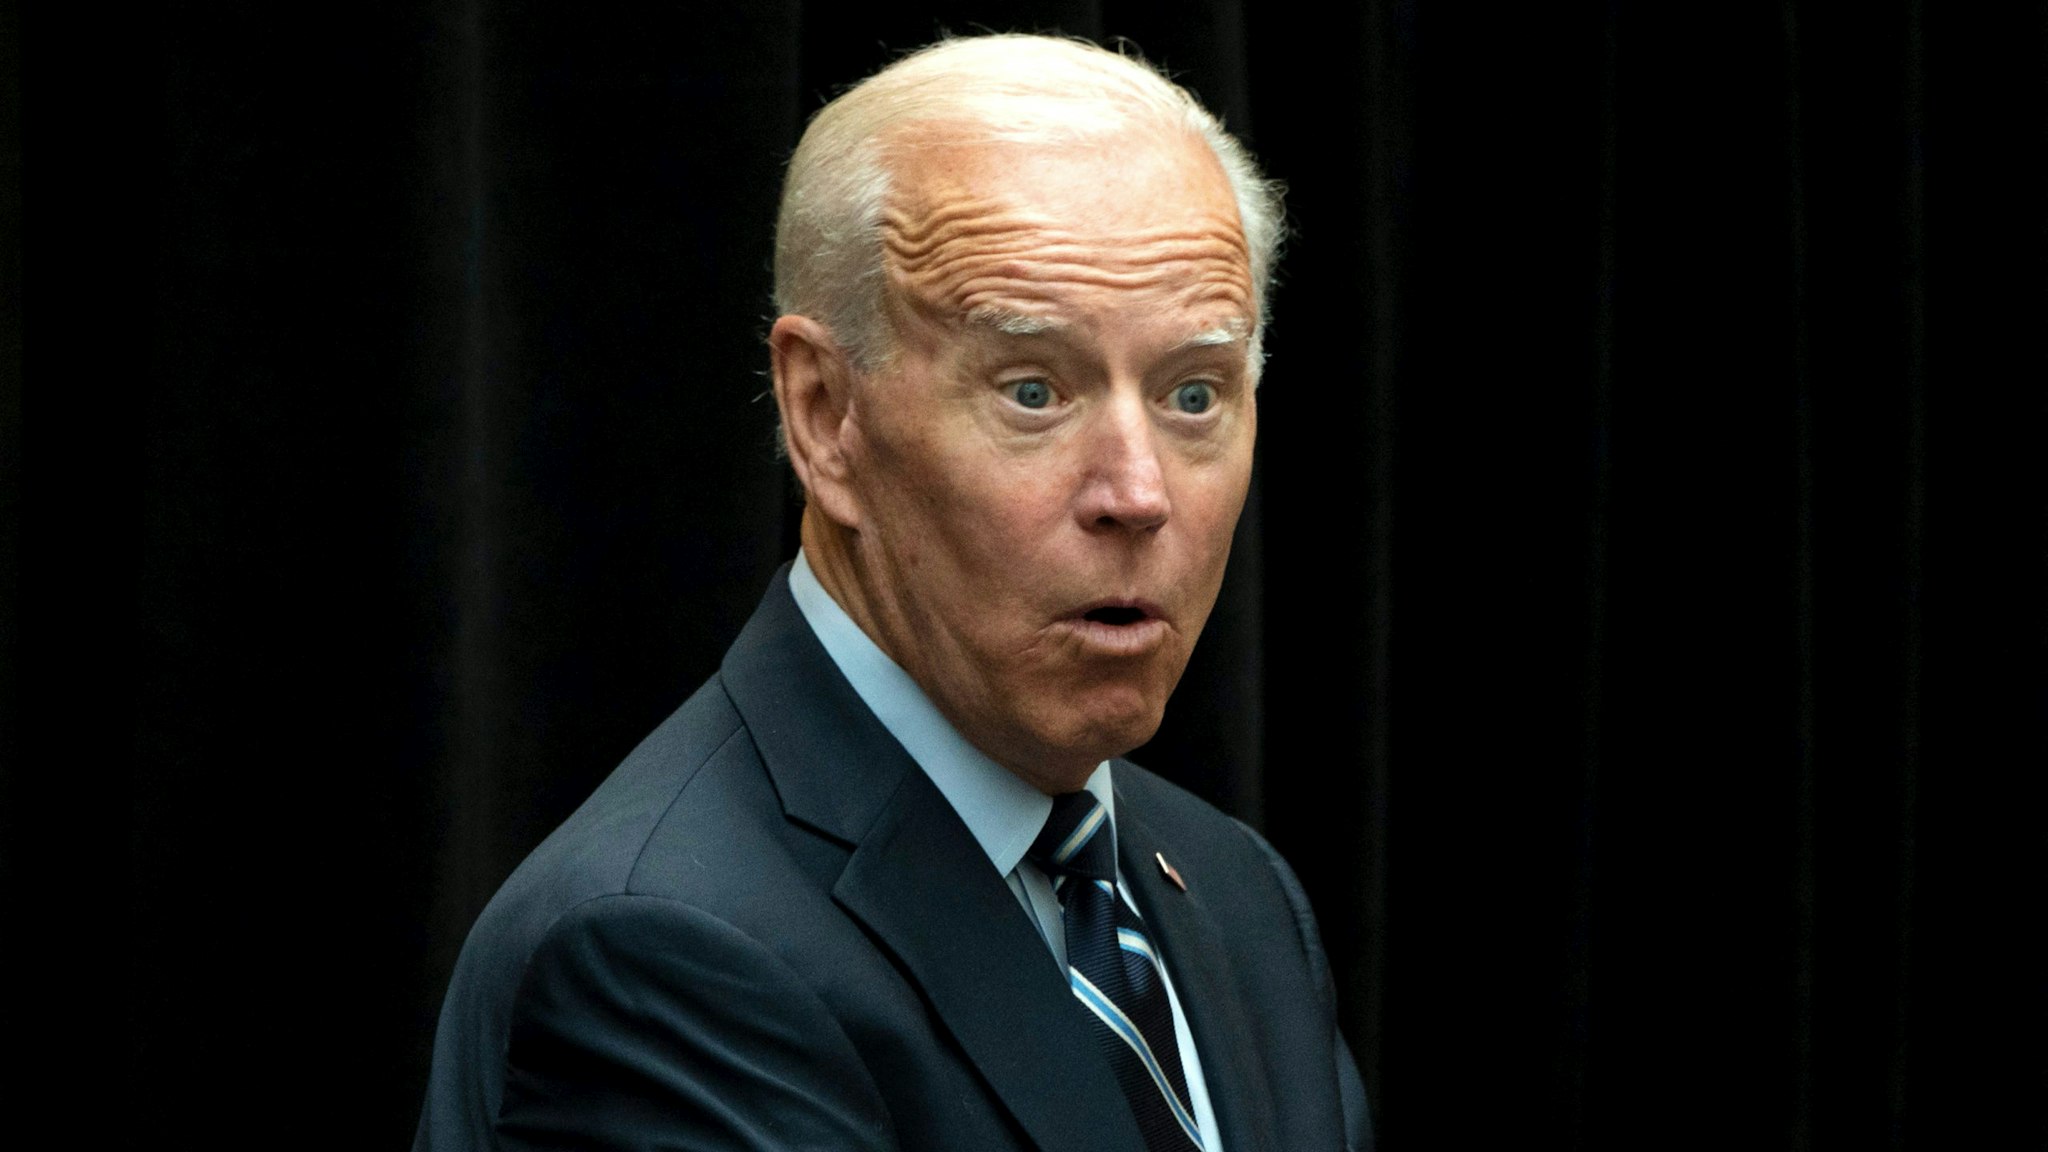 Former US Vice President Joe Biden, the leading Democratic 2020 presidential candidate, arrives for a speech about his foreign policy vision for America on July 11, 2019 at the Graduate Center at City University New York City.